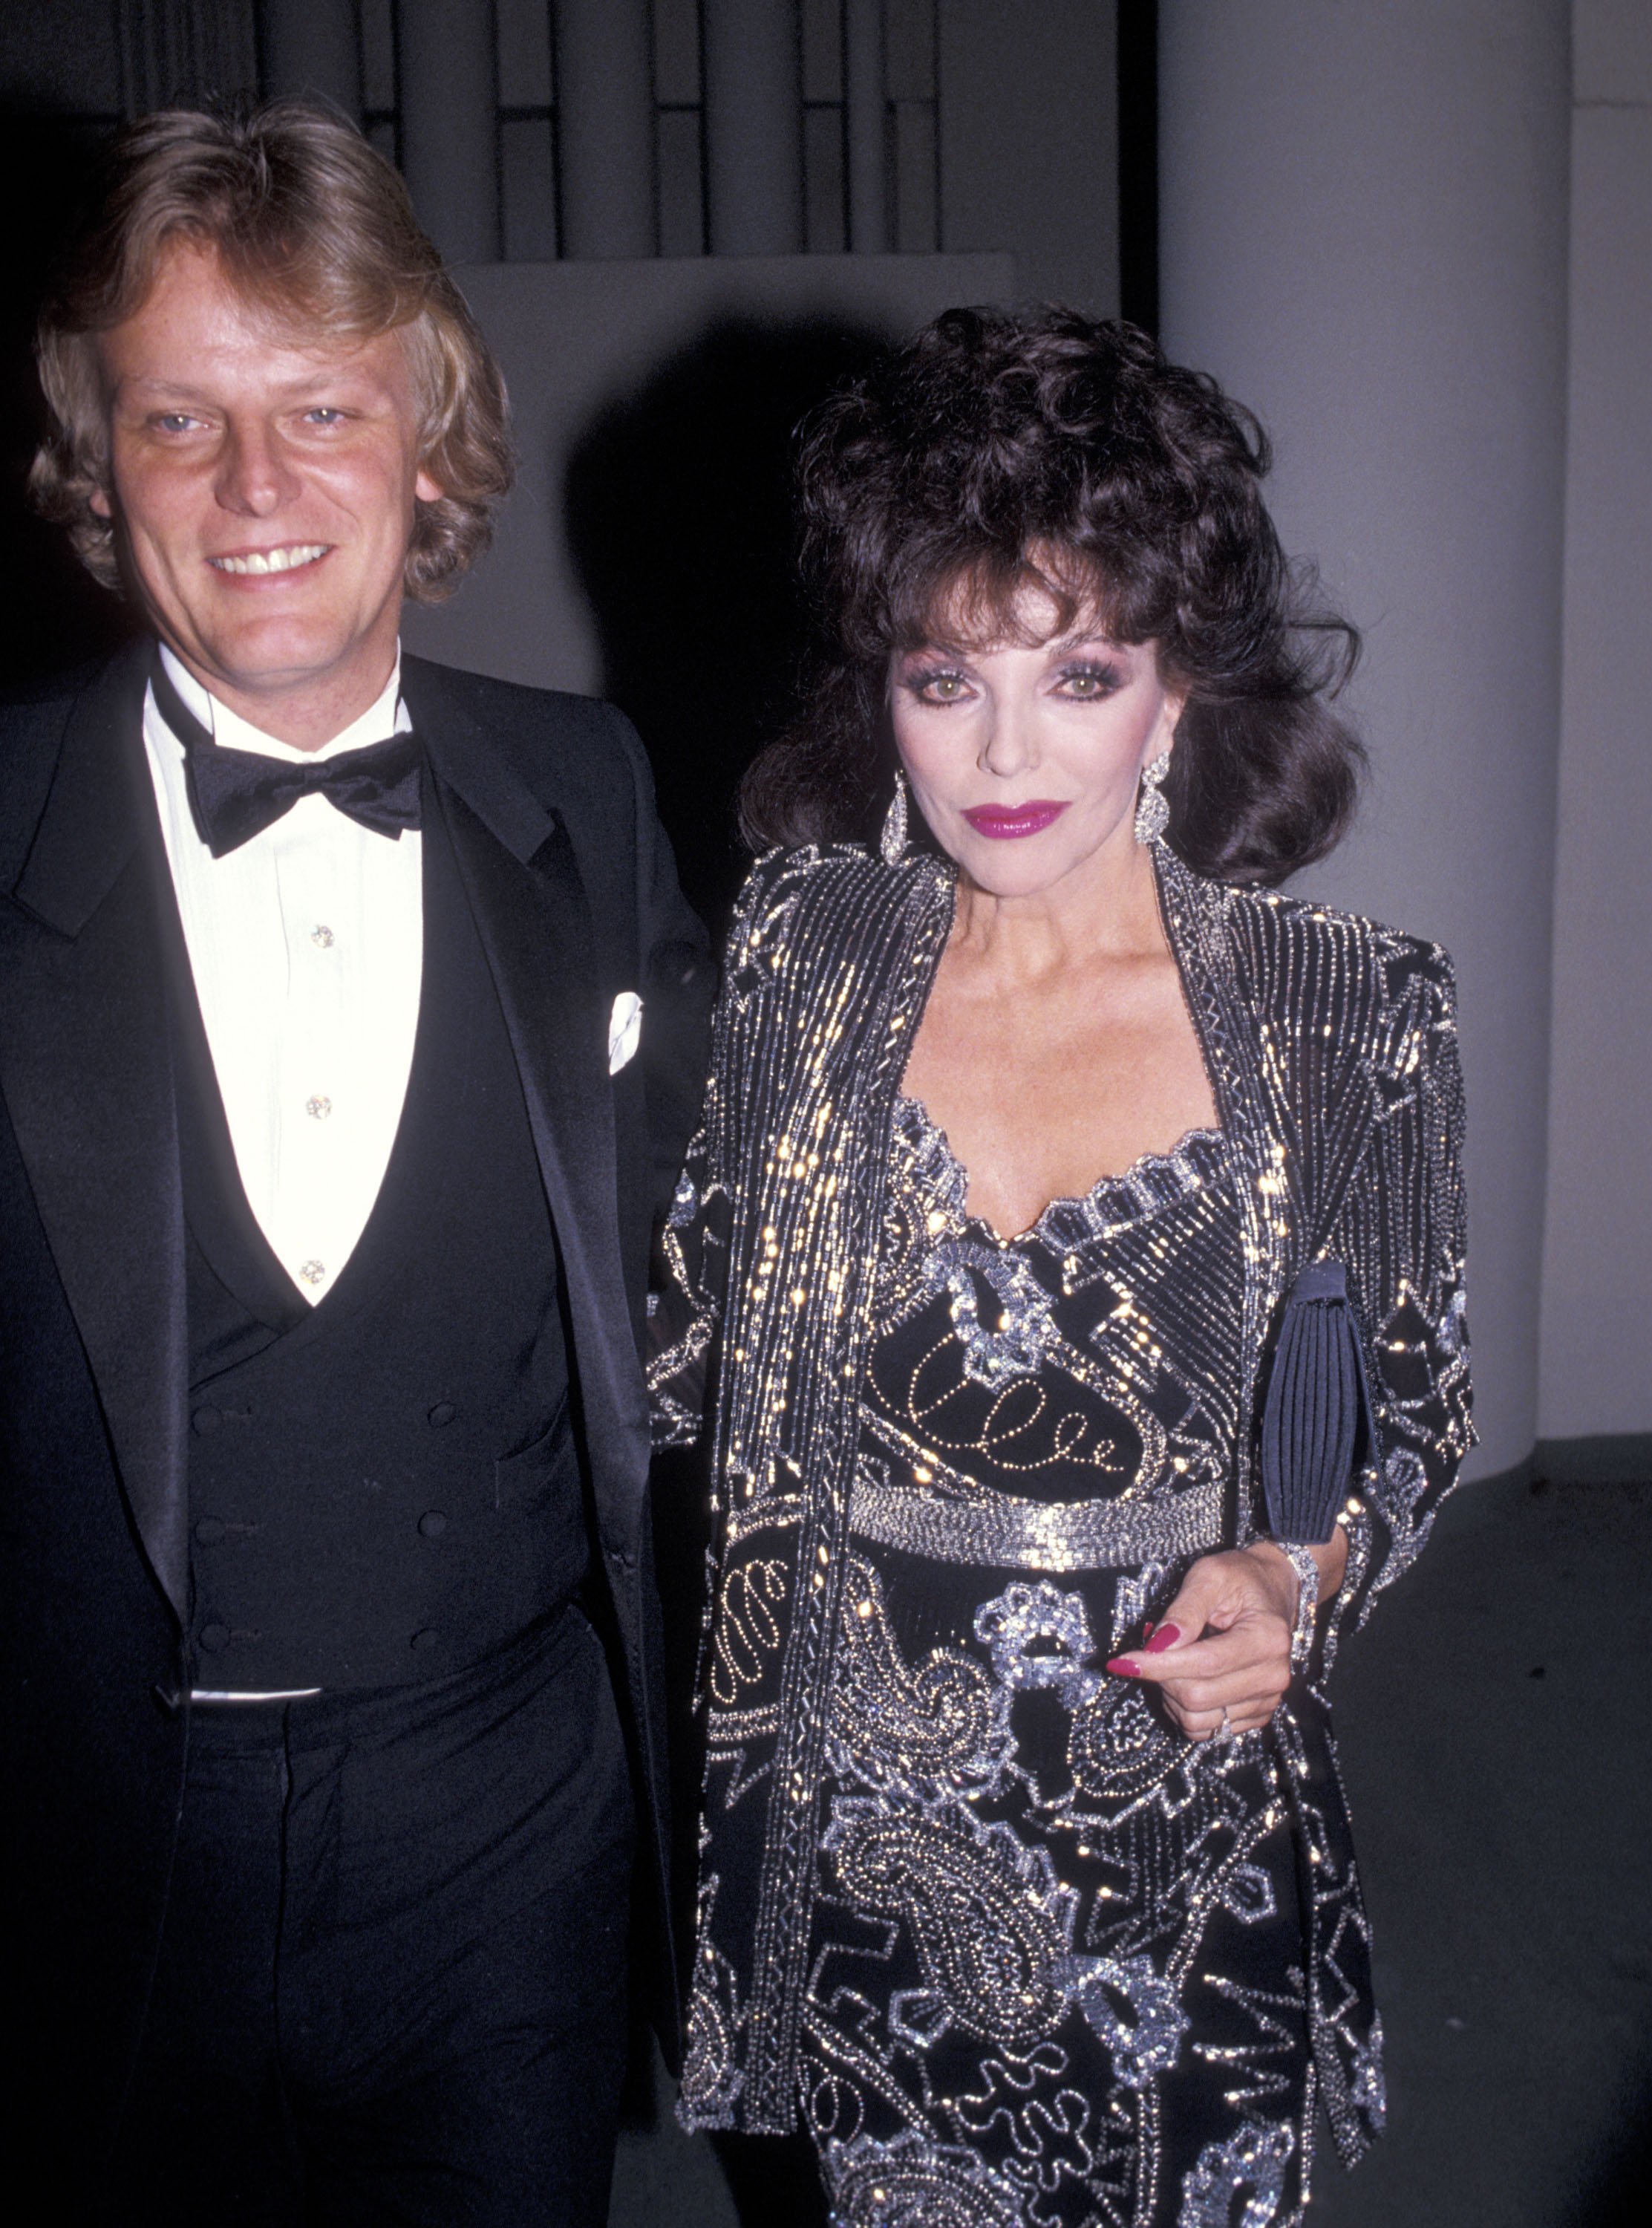 Joan Collins and her boyfriend Peter Holm during the 42nd Annual Golden Globe Awards at Beverly Hilton Hotel on January 26, 1985 in Beverly Hills, California. | Source: Getty Images